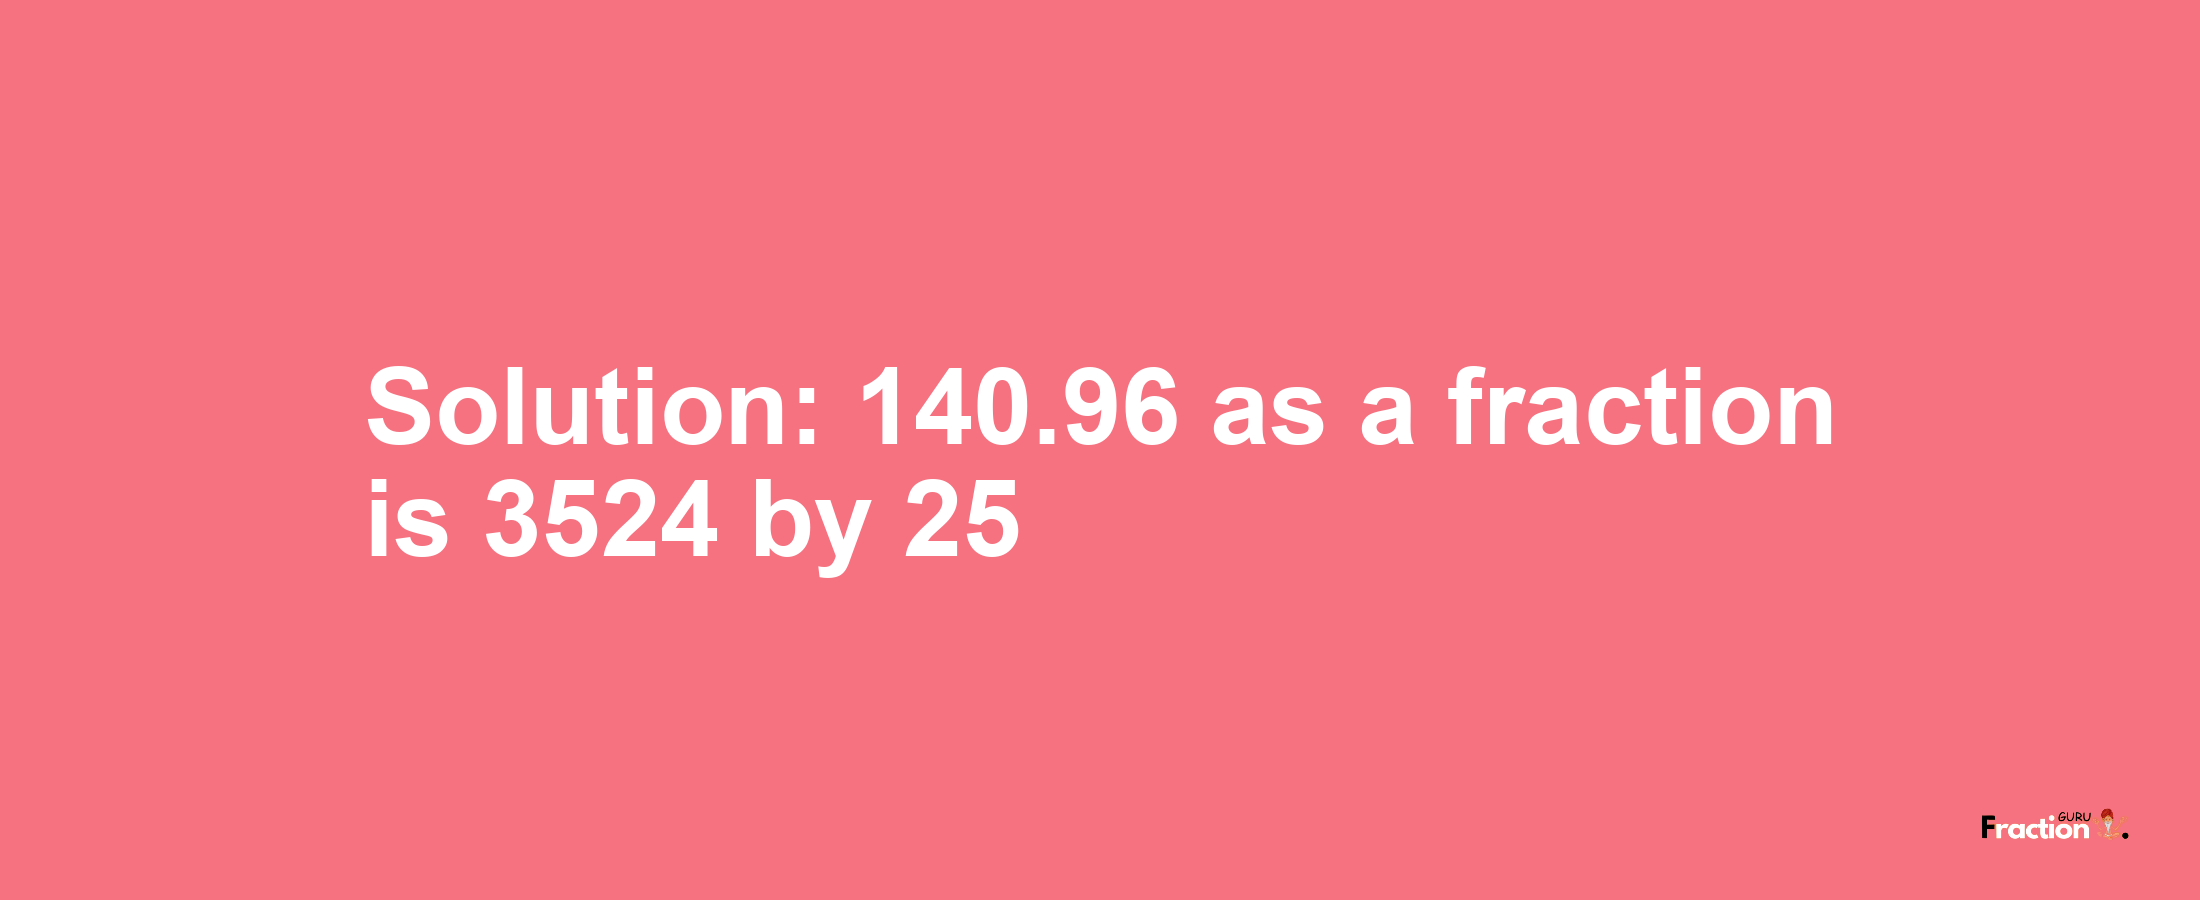 Solution:140.96 as a fraction is 3524/25